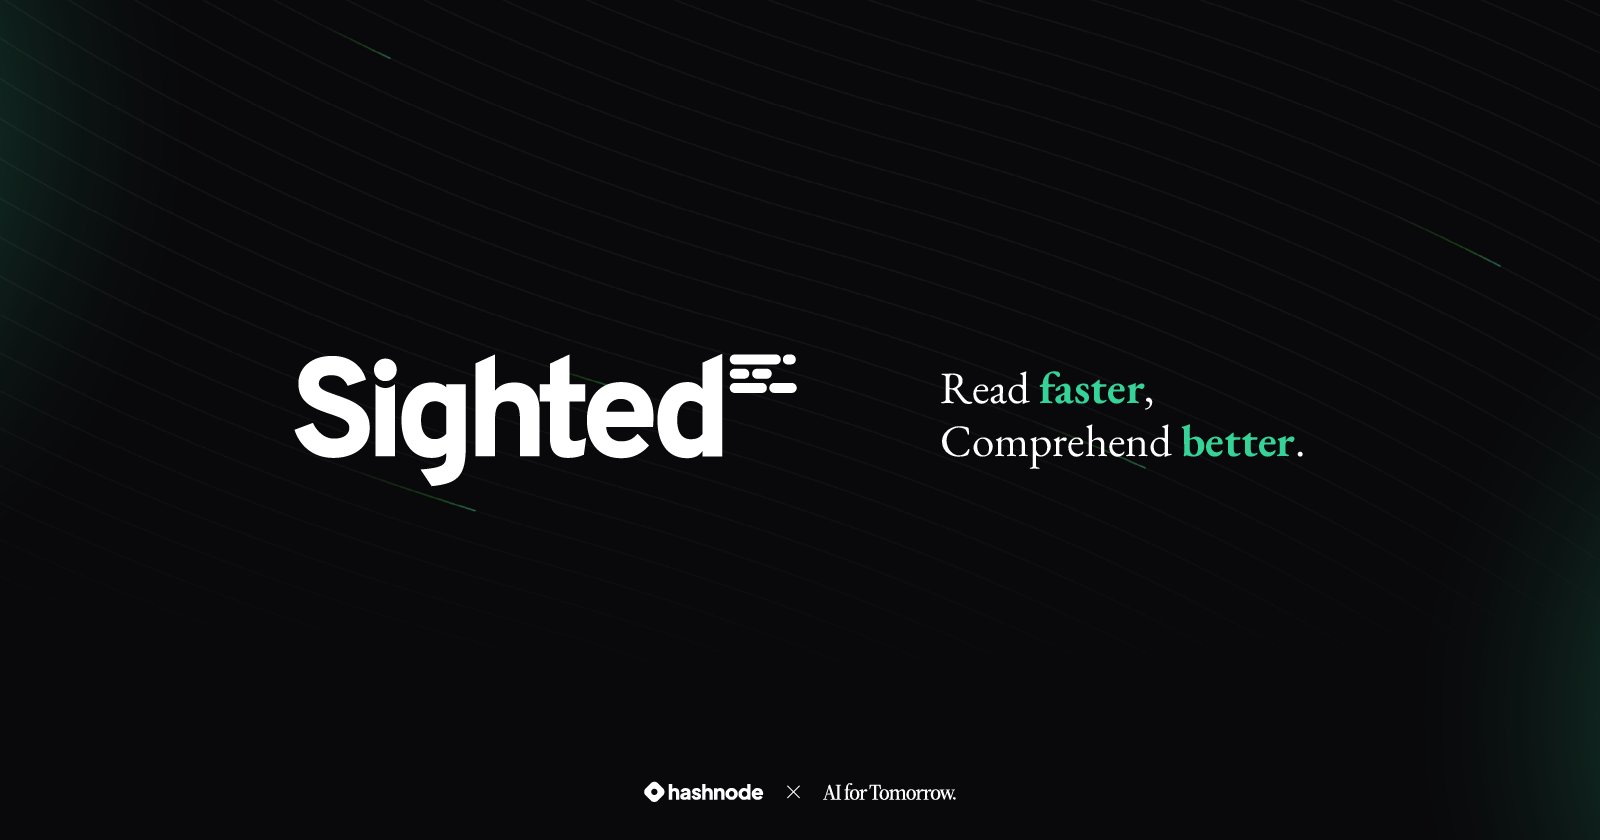 Sighted - Read Faster, Comprehend Better With AI!